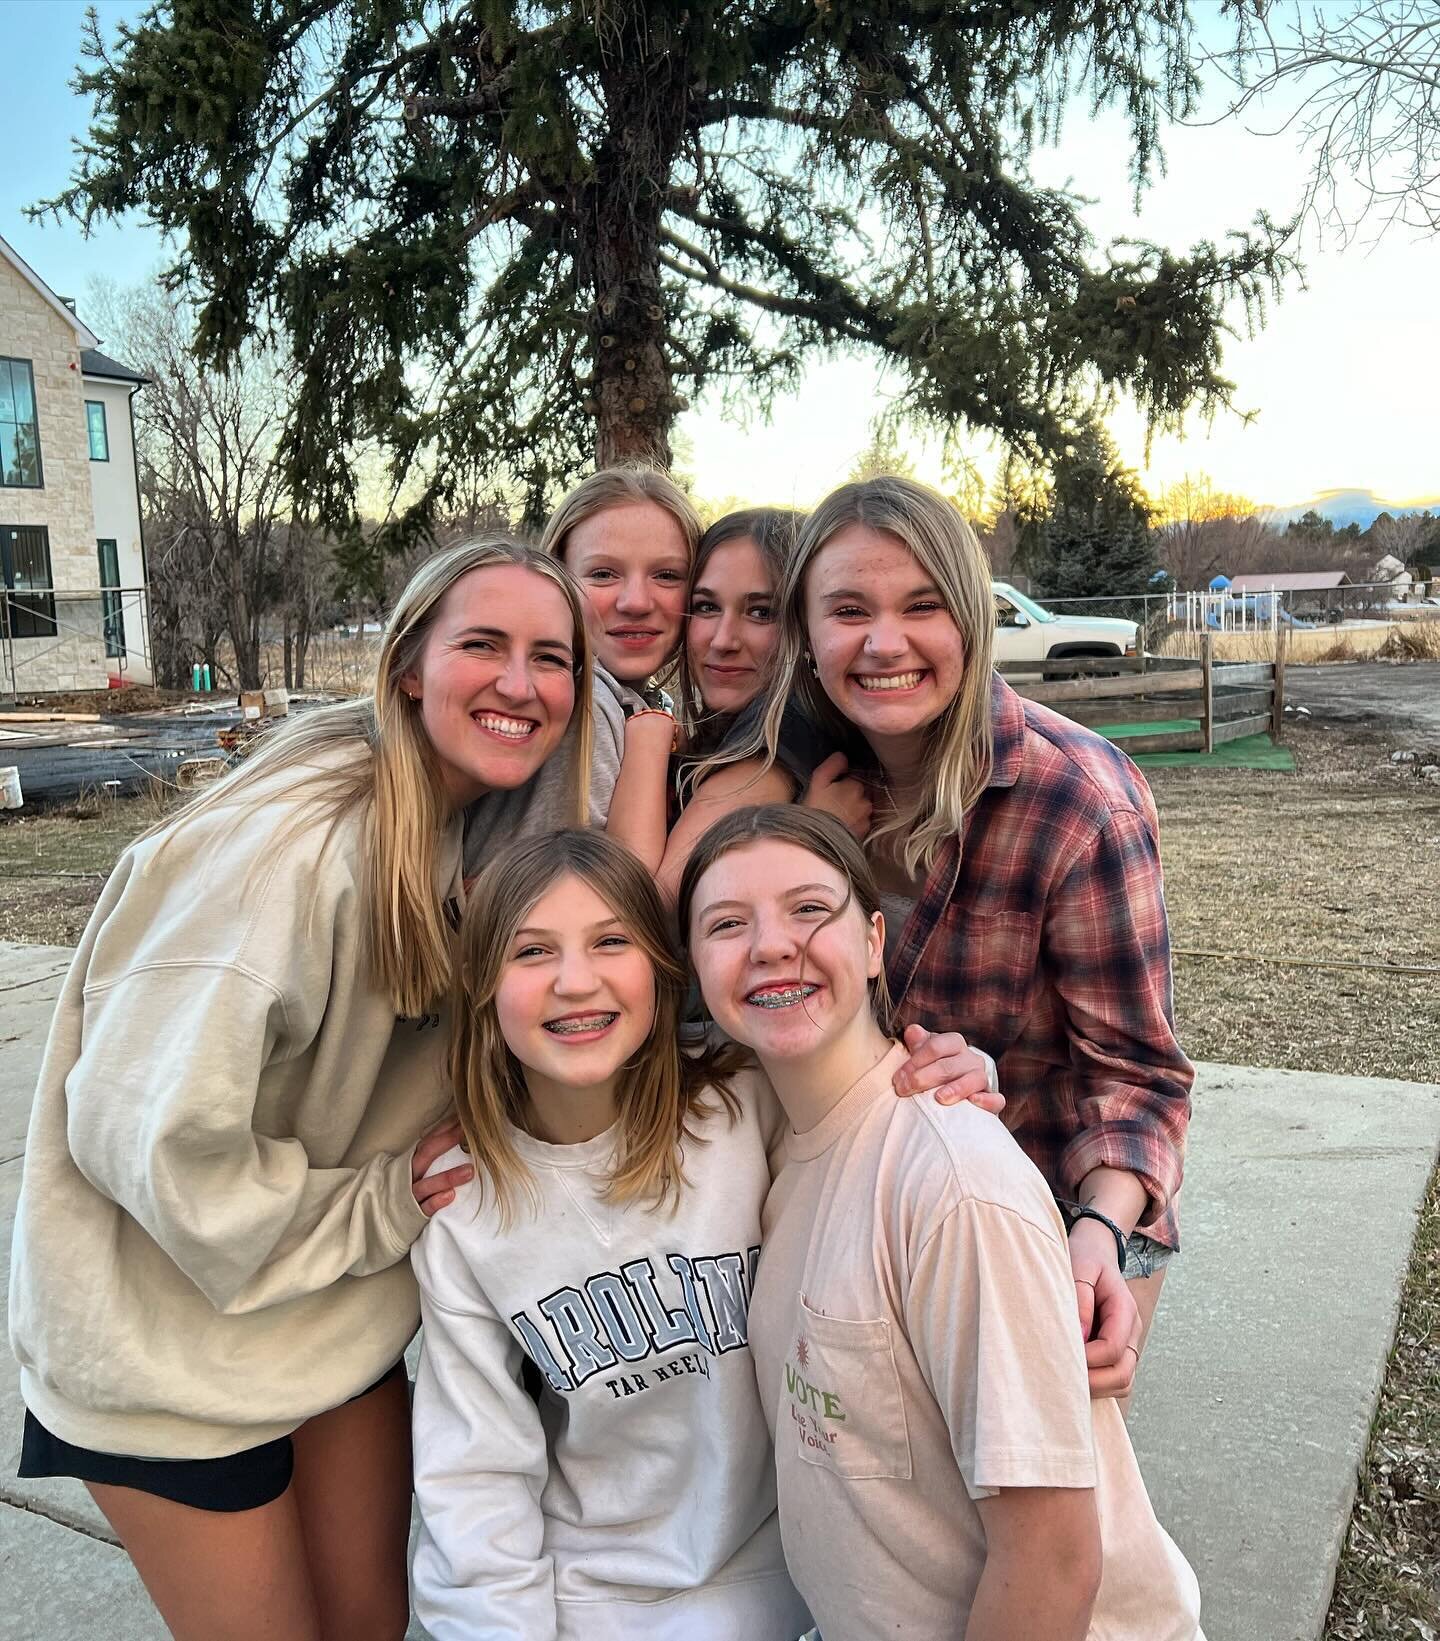 When they aren&rsquo;t taking ✨golden hour✨ pics, these 8th grade gals are studying the book of Esther together at small group!

We are so grateful to have the opportunity to dive into God&rsquo;s Word together. What have you loved studying in your K